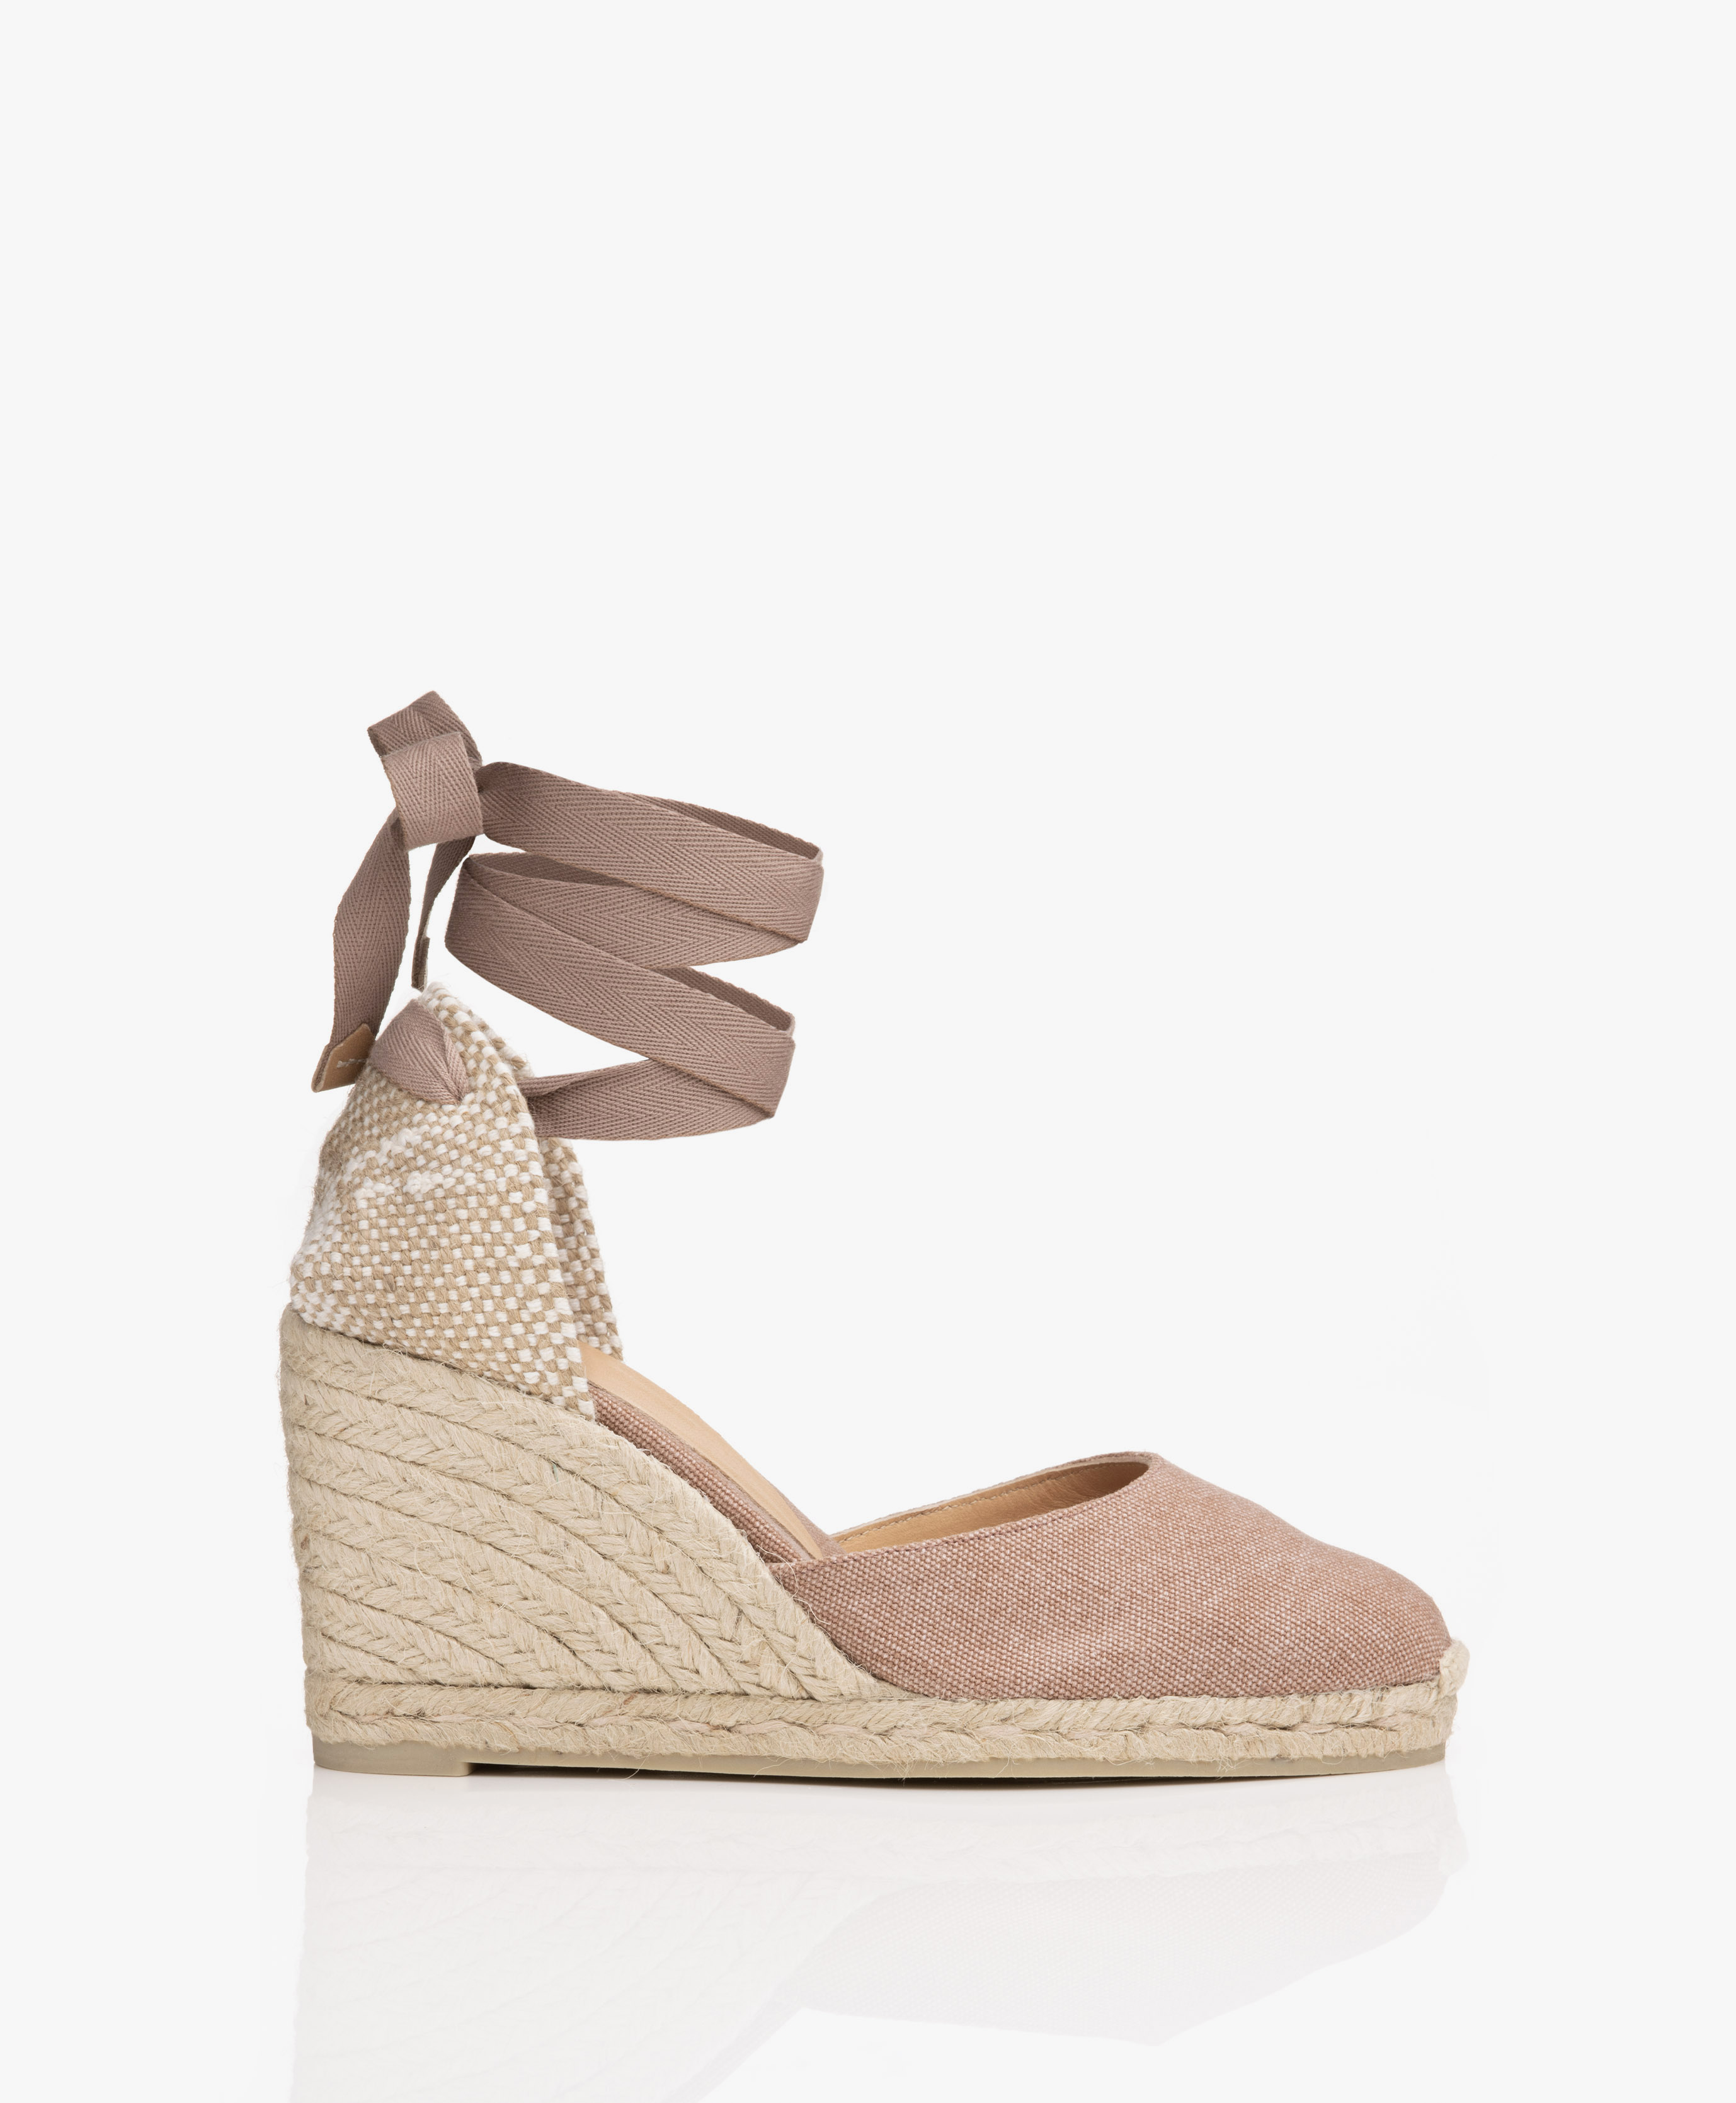 Castaner Carina 10cm Canvas Wedge Espadrilles - Dusty Pink - 816 - dusty pink